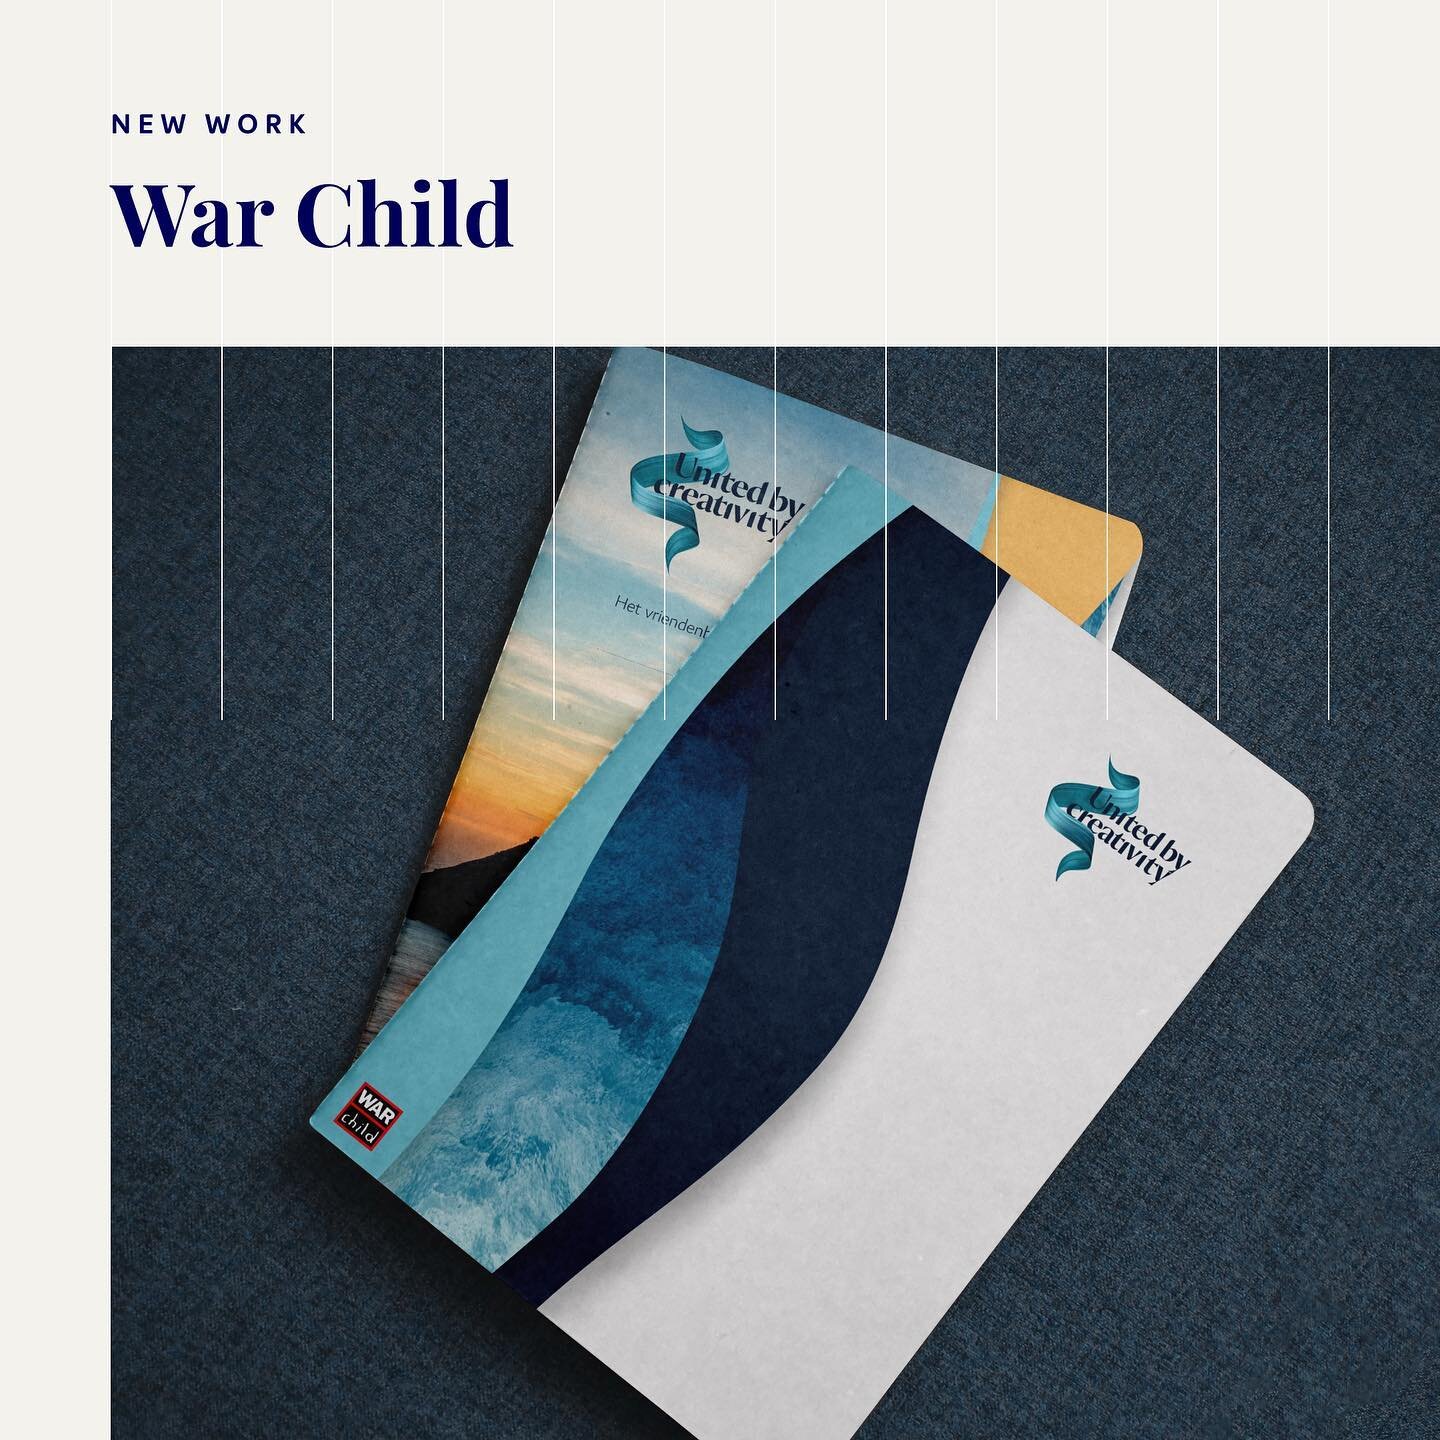 #newwork finished new art direction and design project as partner for @warchildholland Full project on my website! 

#freelancedesigner #artdirection #editorialdesign #grafischontwerper